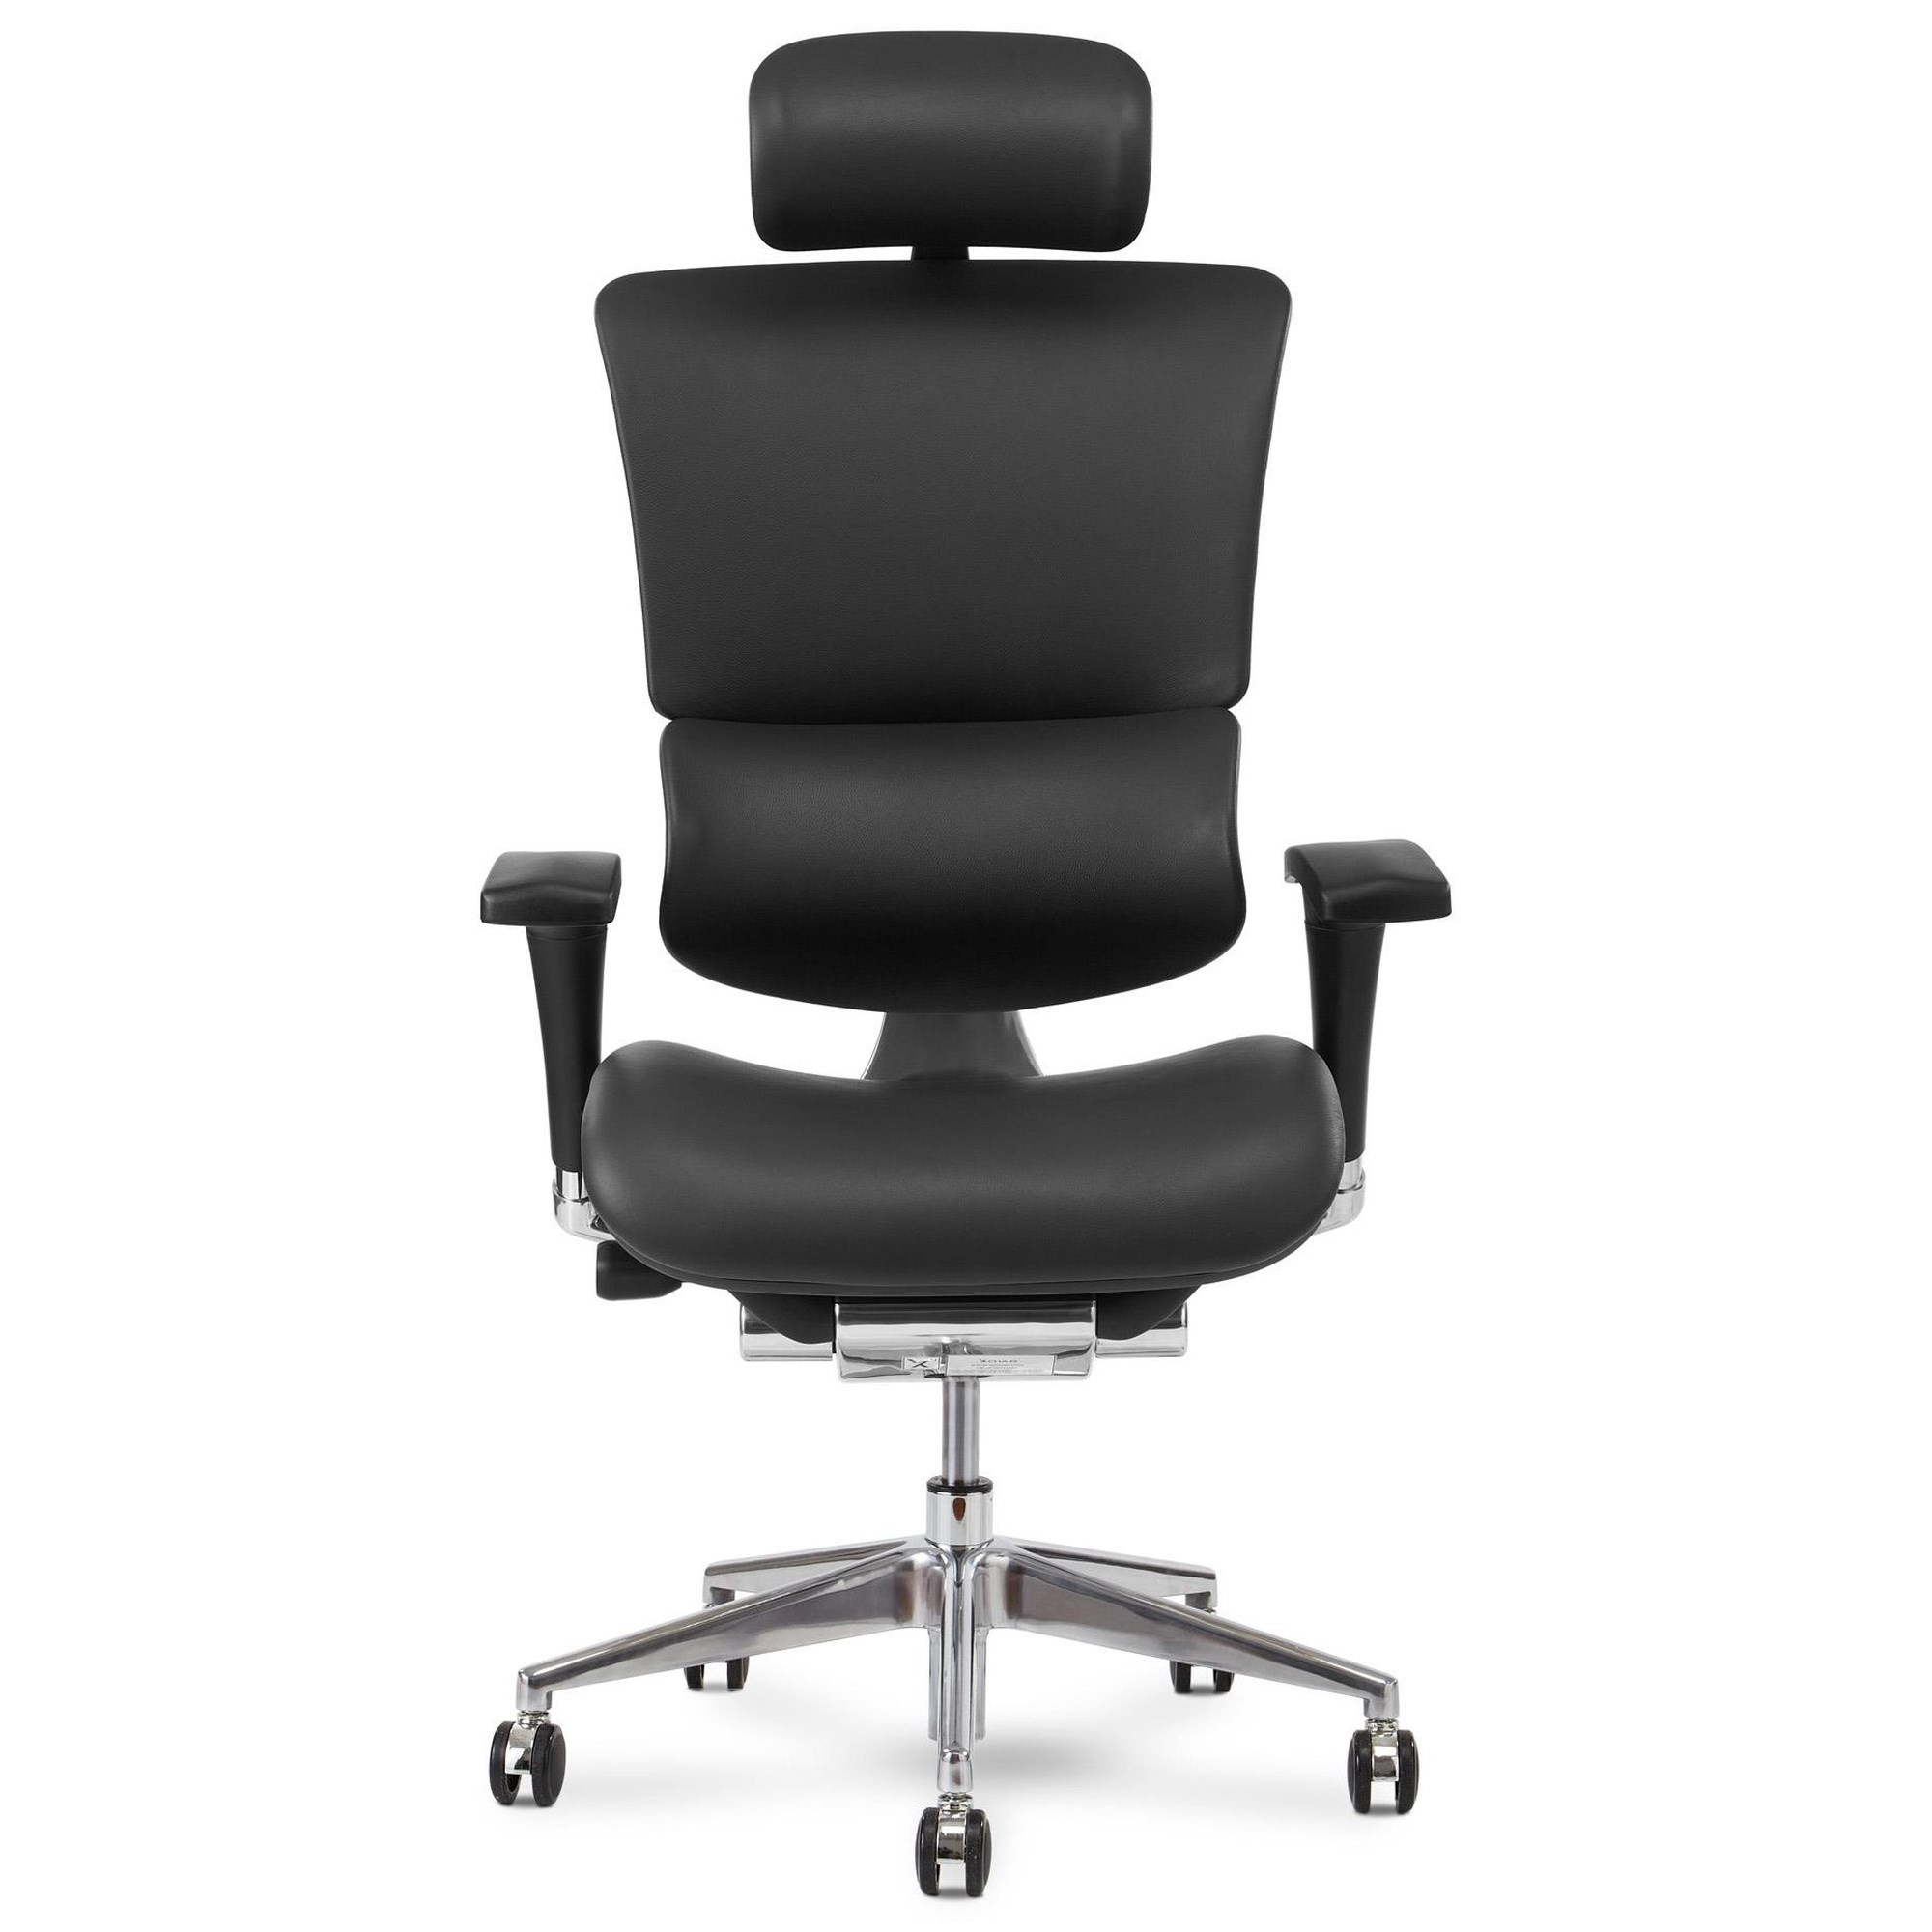 X-Chair X4 Executive Chair Review: A Strong Choice for the Office